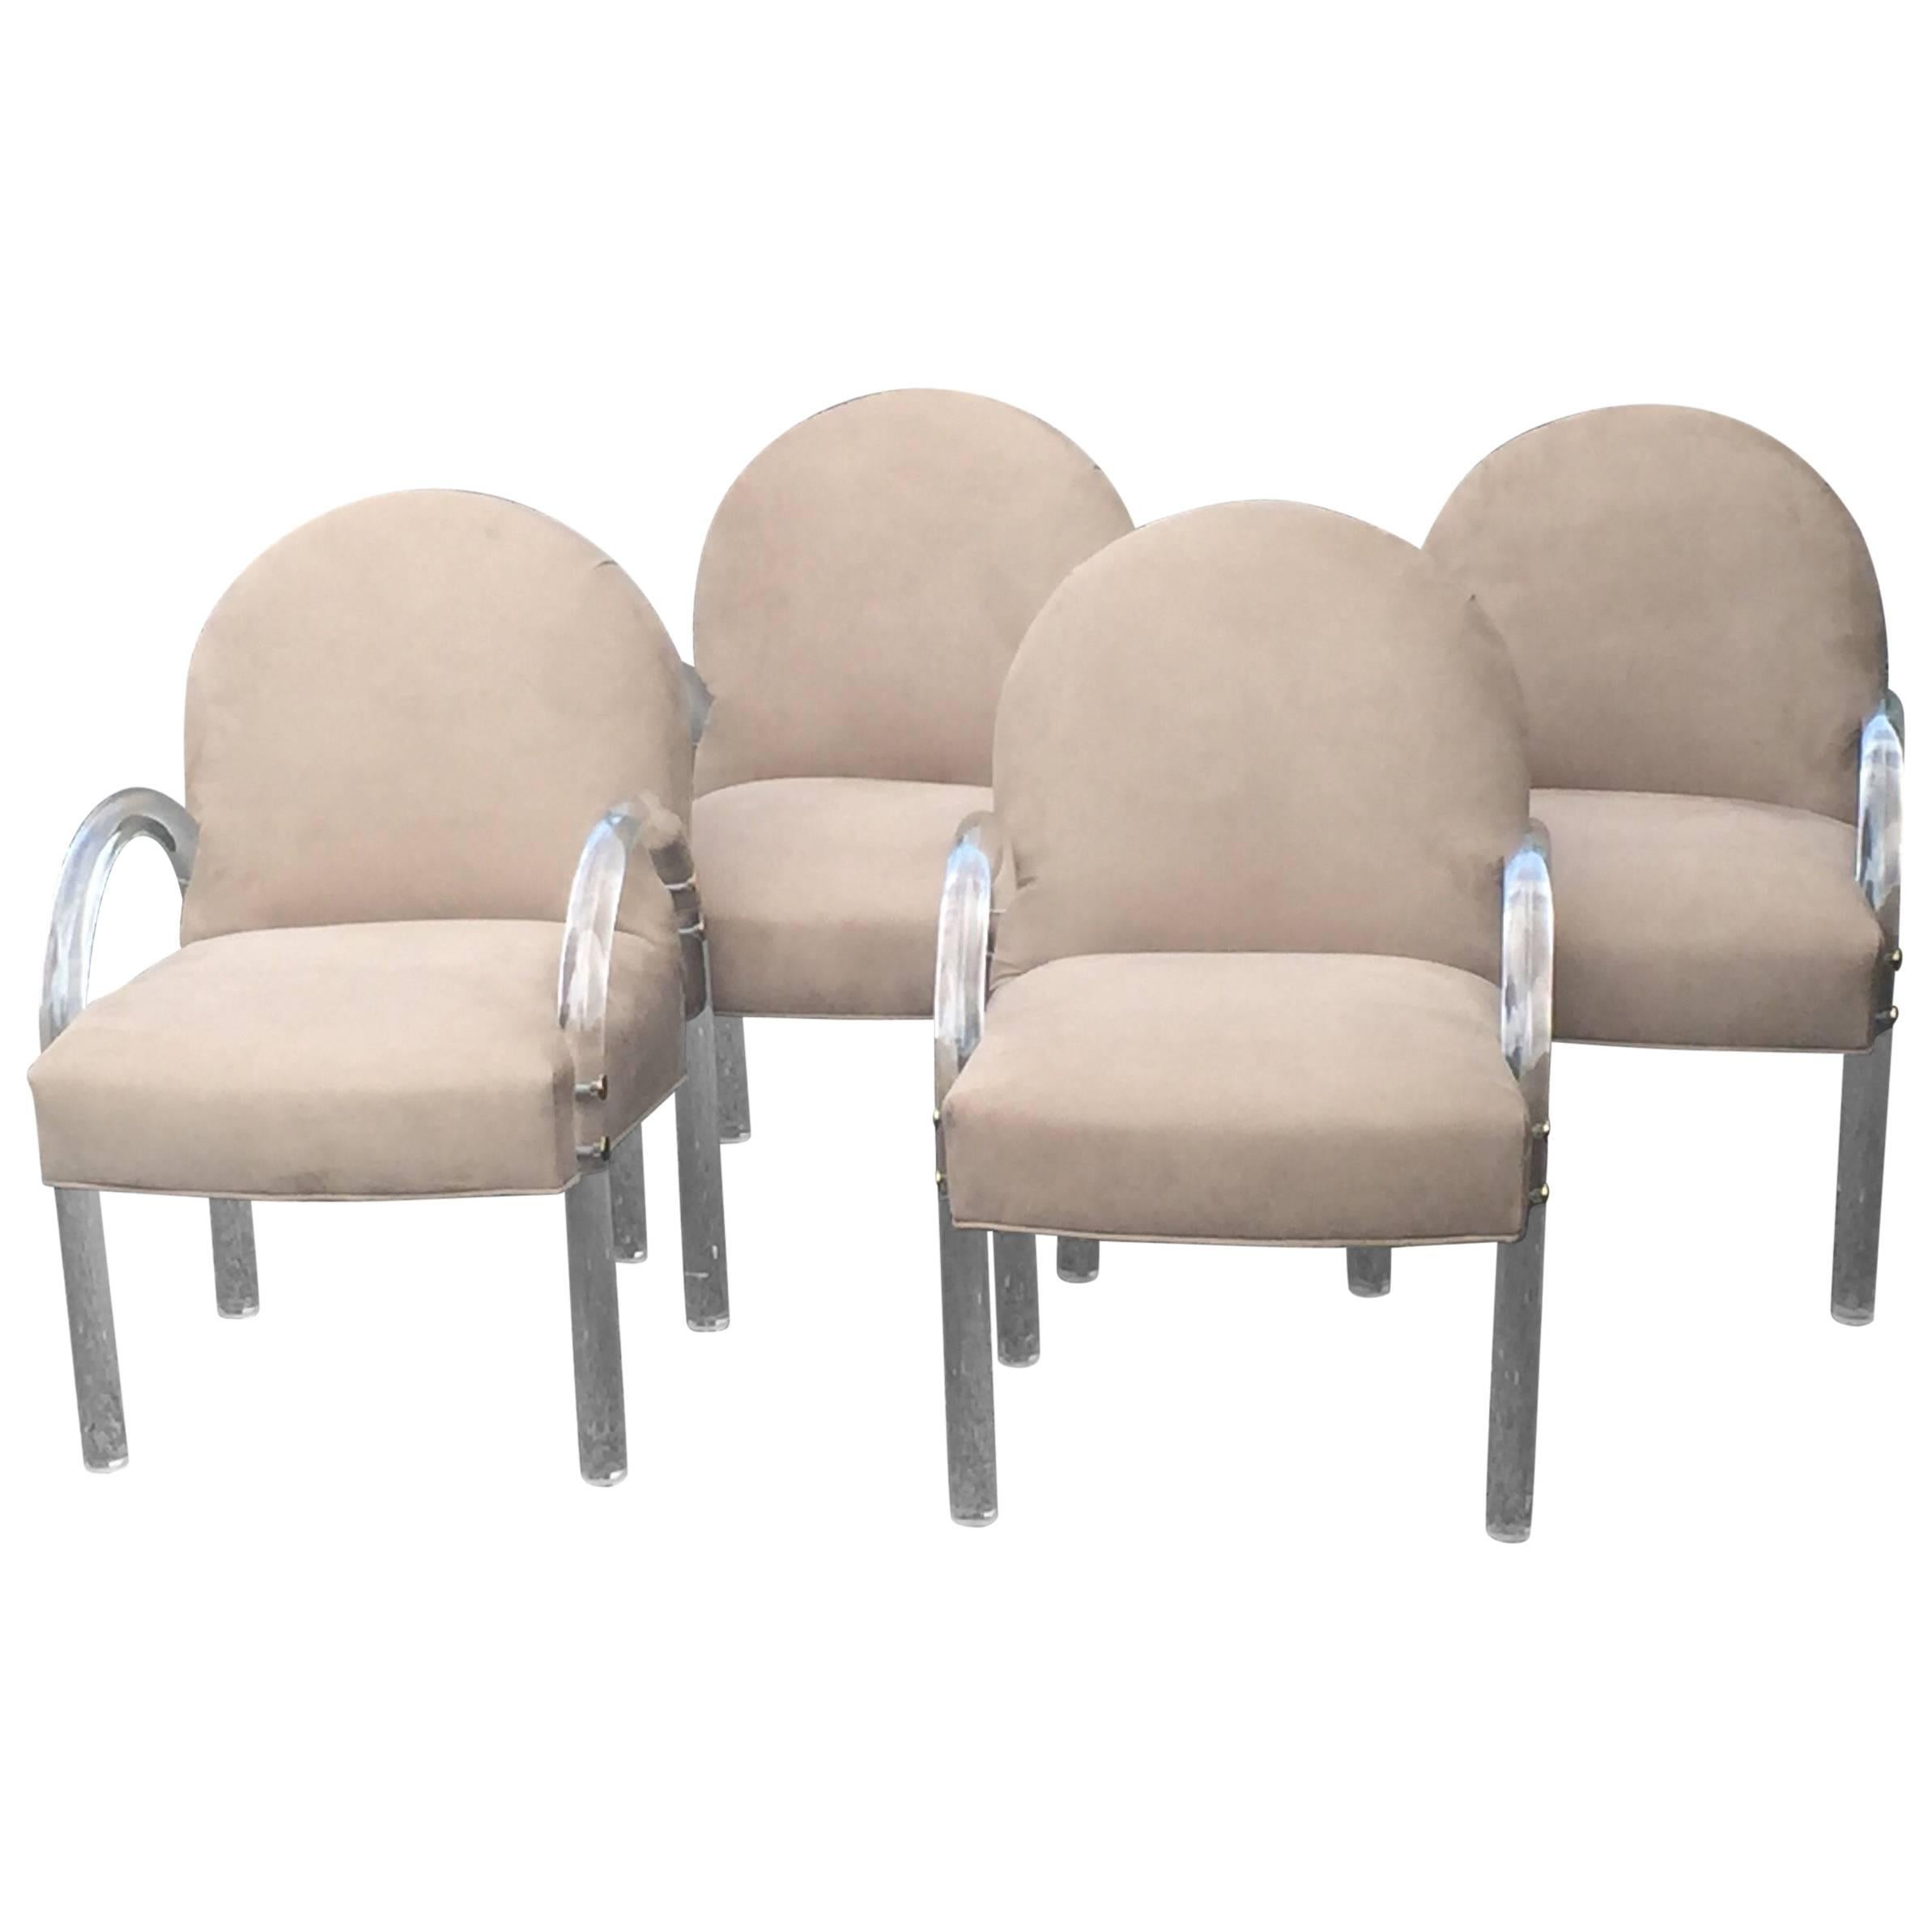 Set of Four Classic Mid-Century Modern Lucite and Upholstered Armchairs